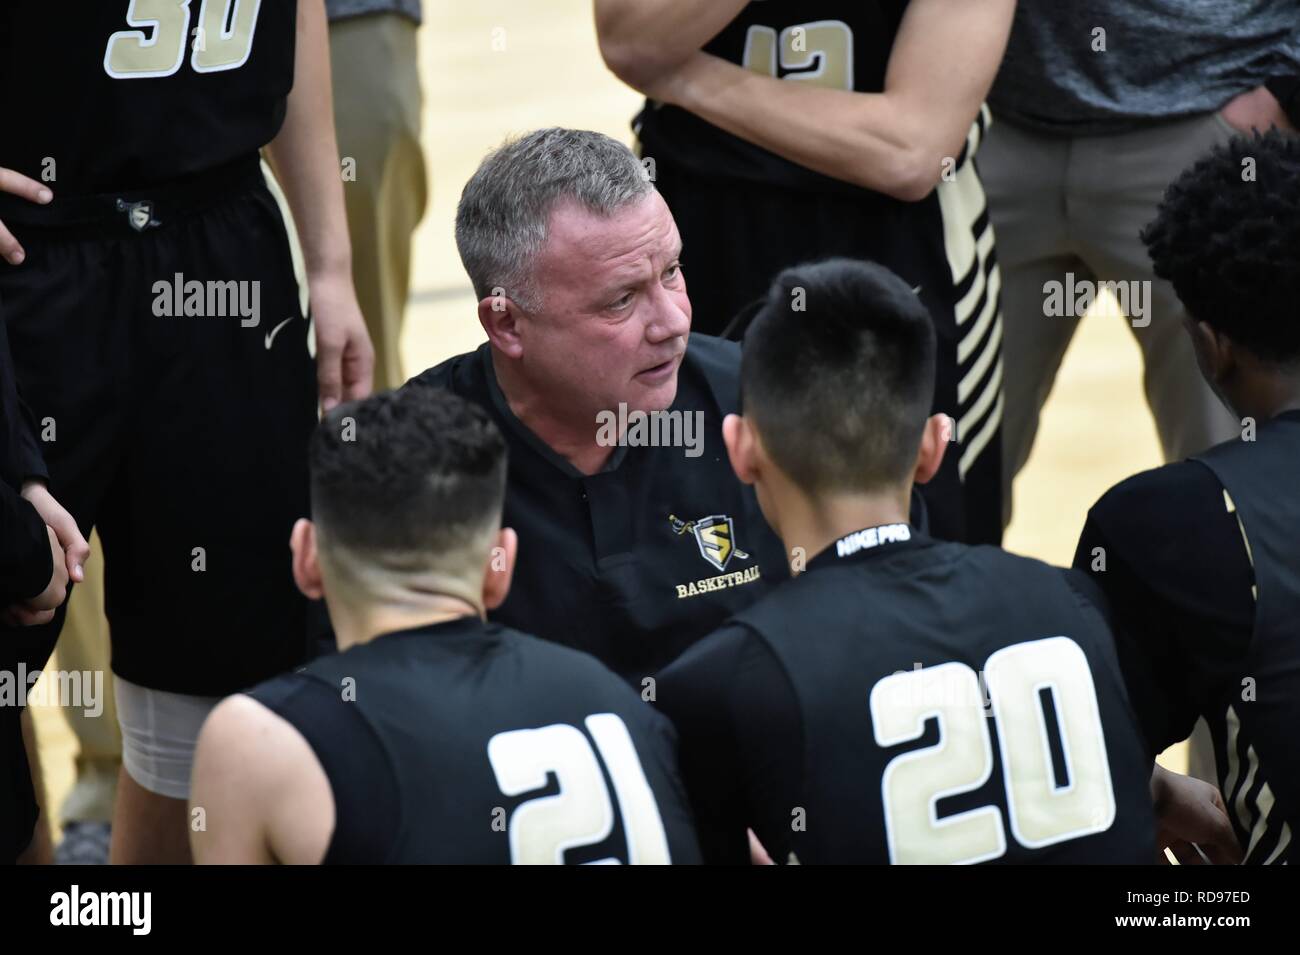 Bartlett, Illinois, USA. Coach providing instruction and strategy to his team during a time out. Stock Photo